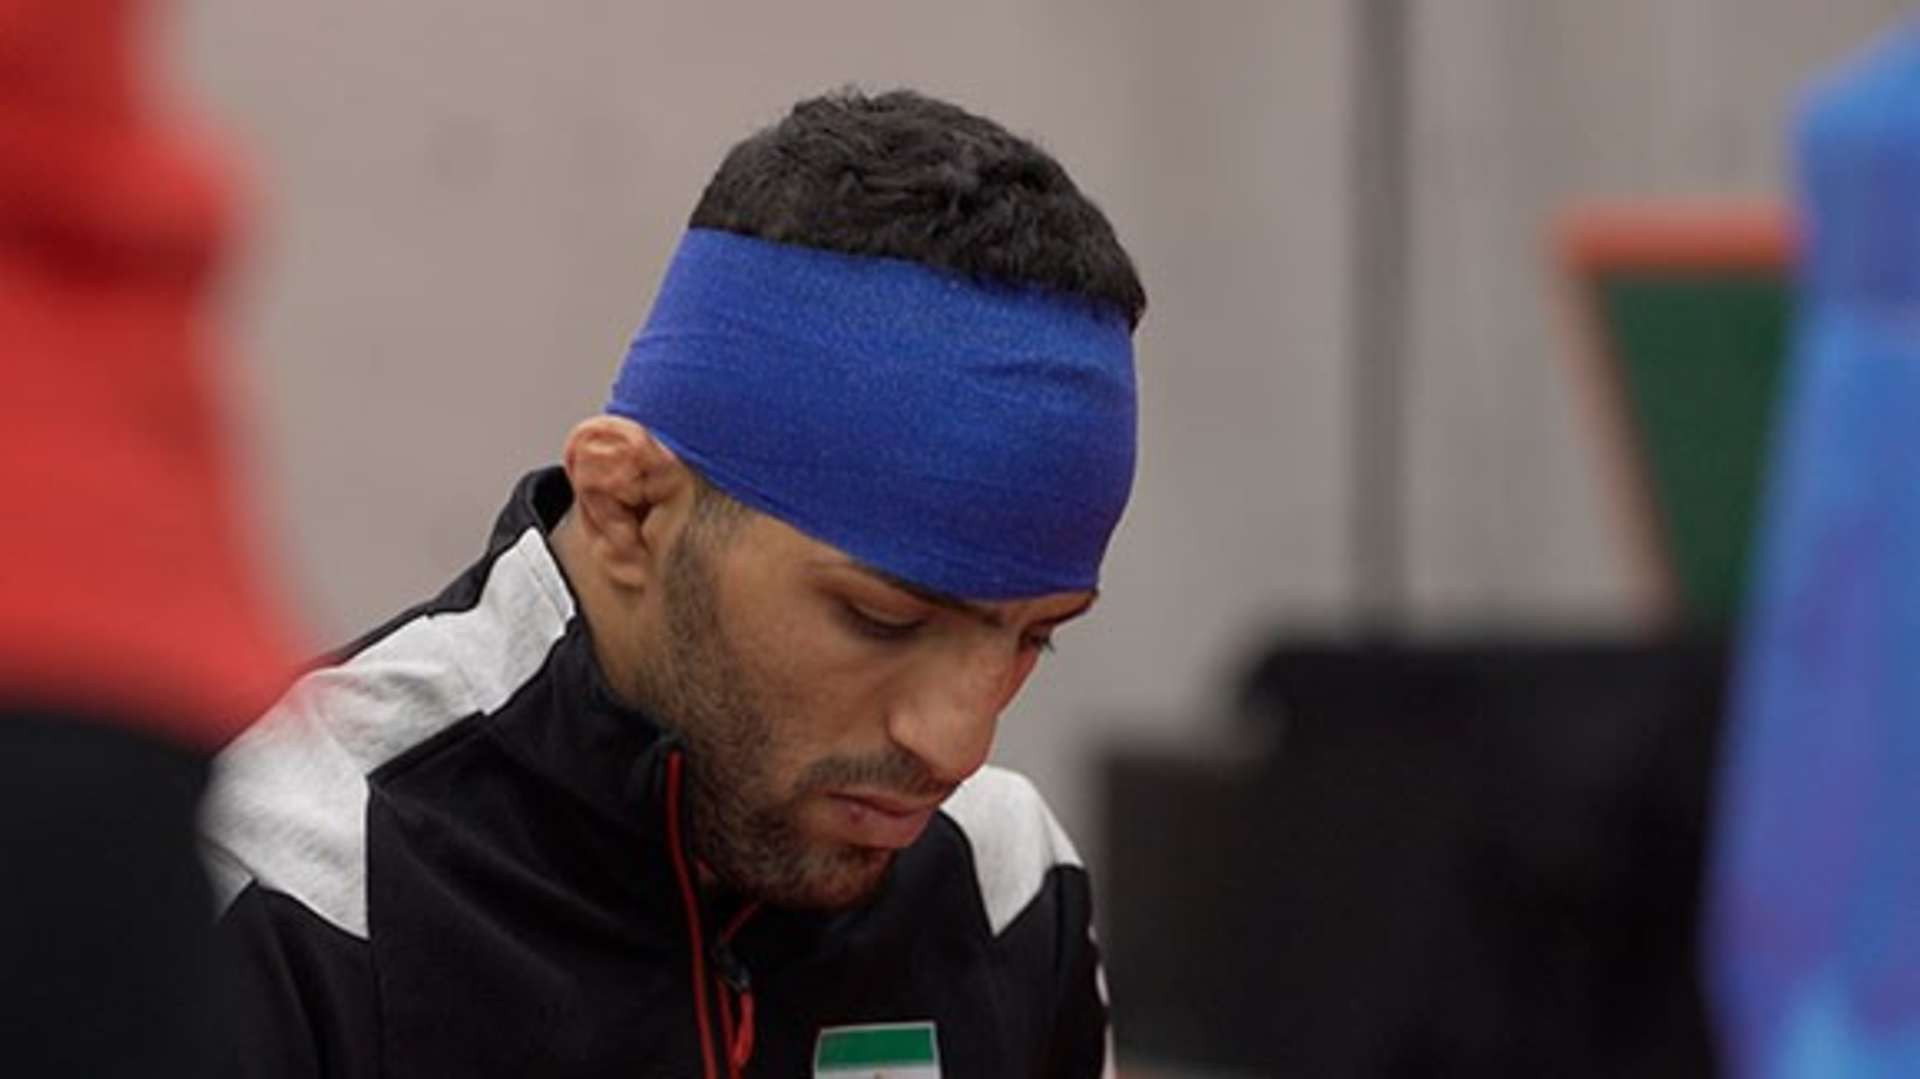 Saeid Mollaei said he was threatened by Iranian officials at the 2019 World Judo Championships ©IJF